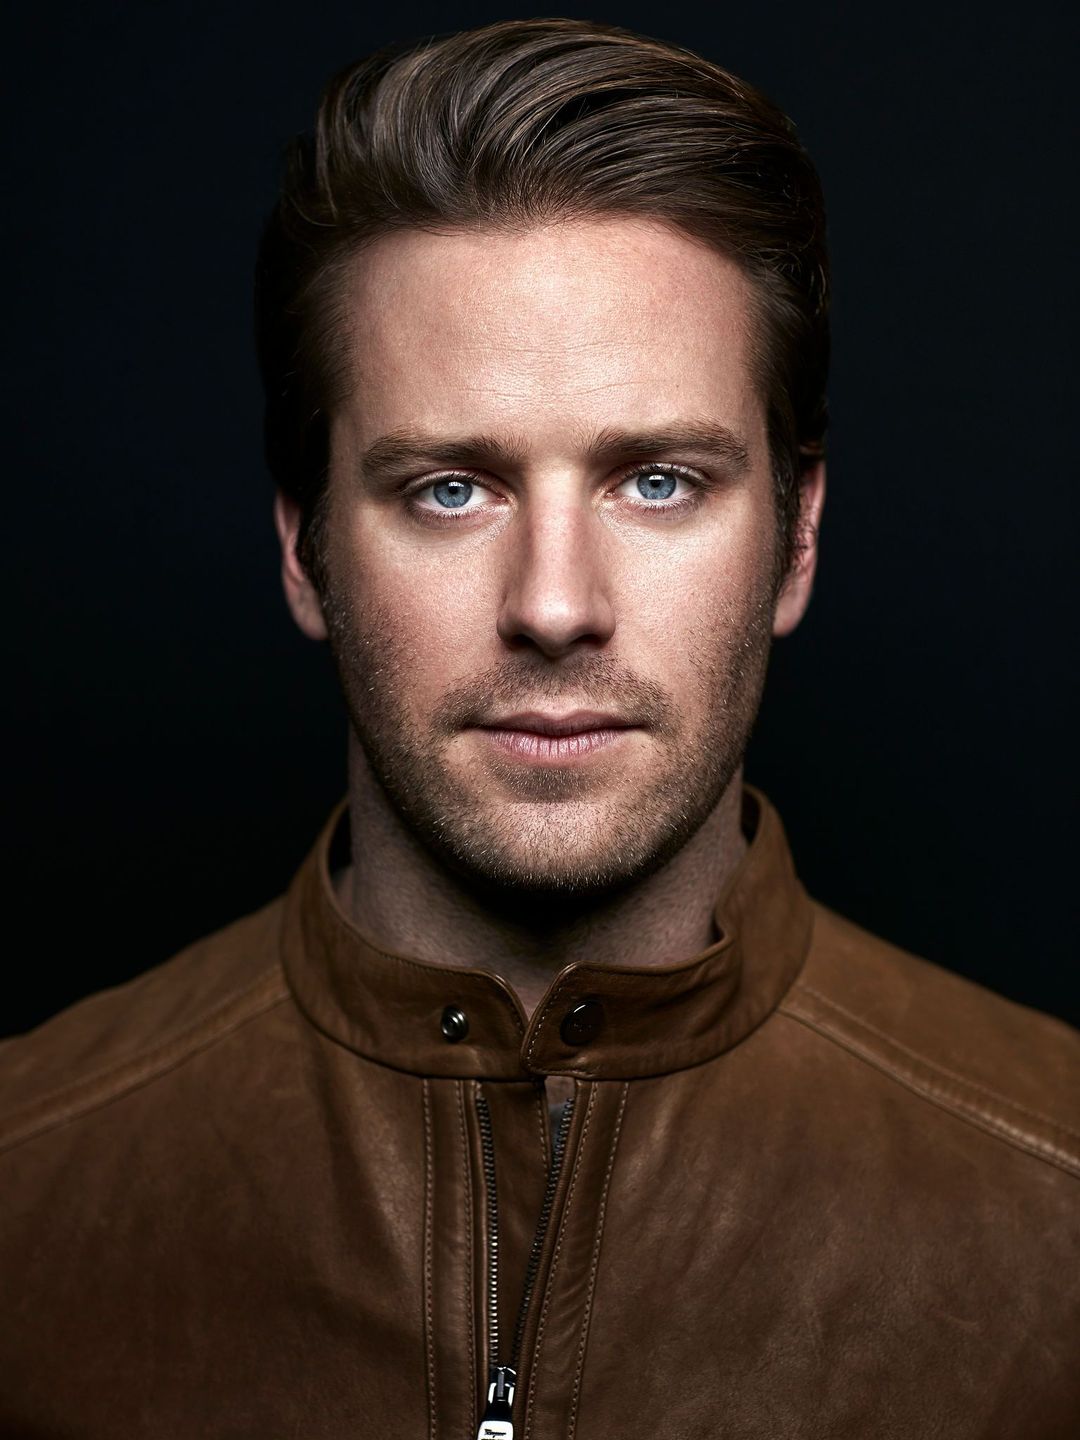 Armie Hammer who is he